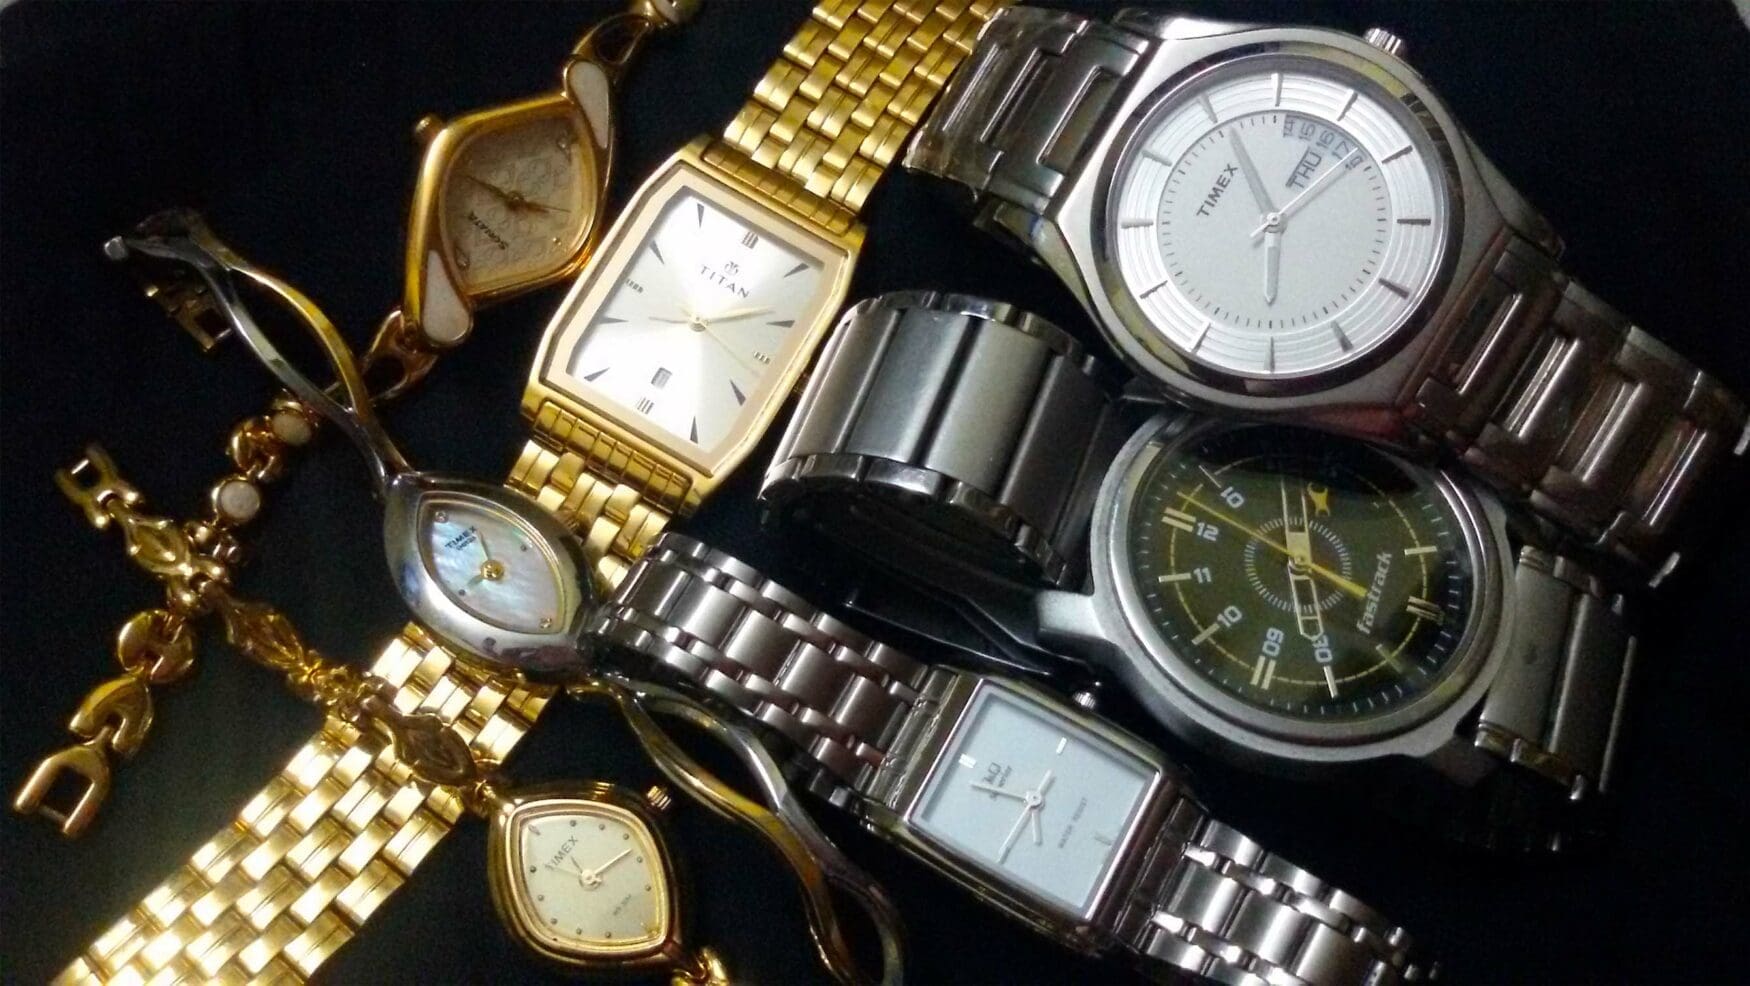 How to make your watch collection stand out